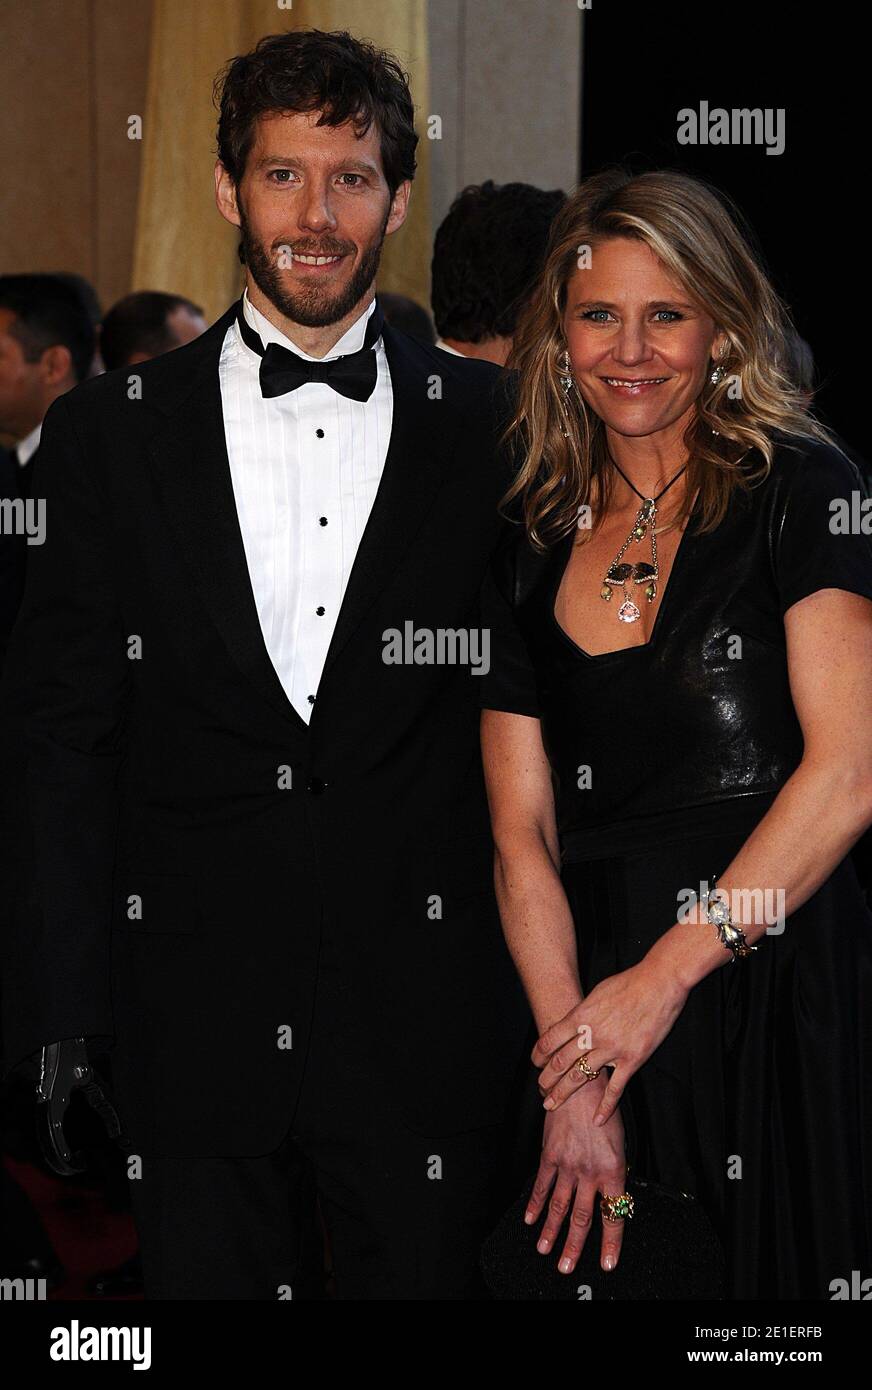 Aron Ralston and Jessica Trusty arrive at the 83rd Annual Academy Awards, held at the Kodak Theatre in Los Angeles, CA, USA on February 27, 2011. Photo by Lionel Hahn/ABACAUSA.COM Stock Photo